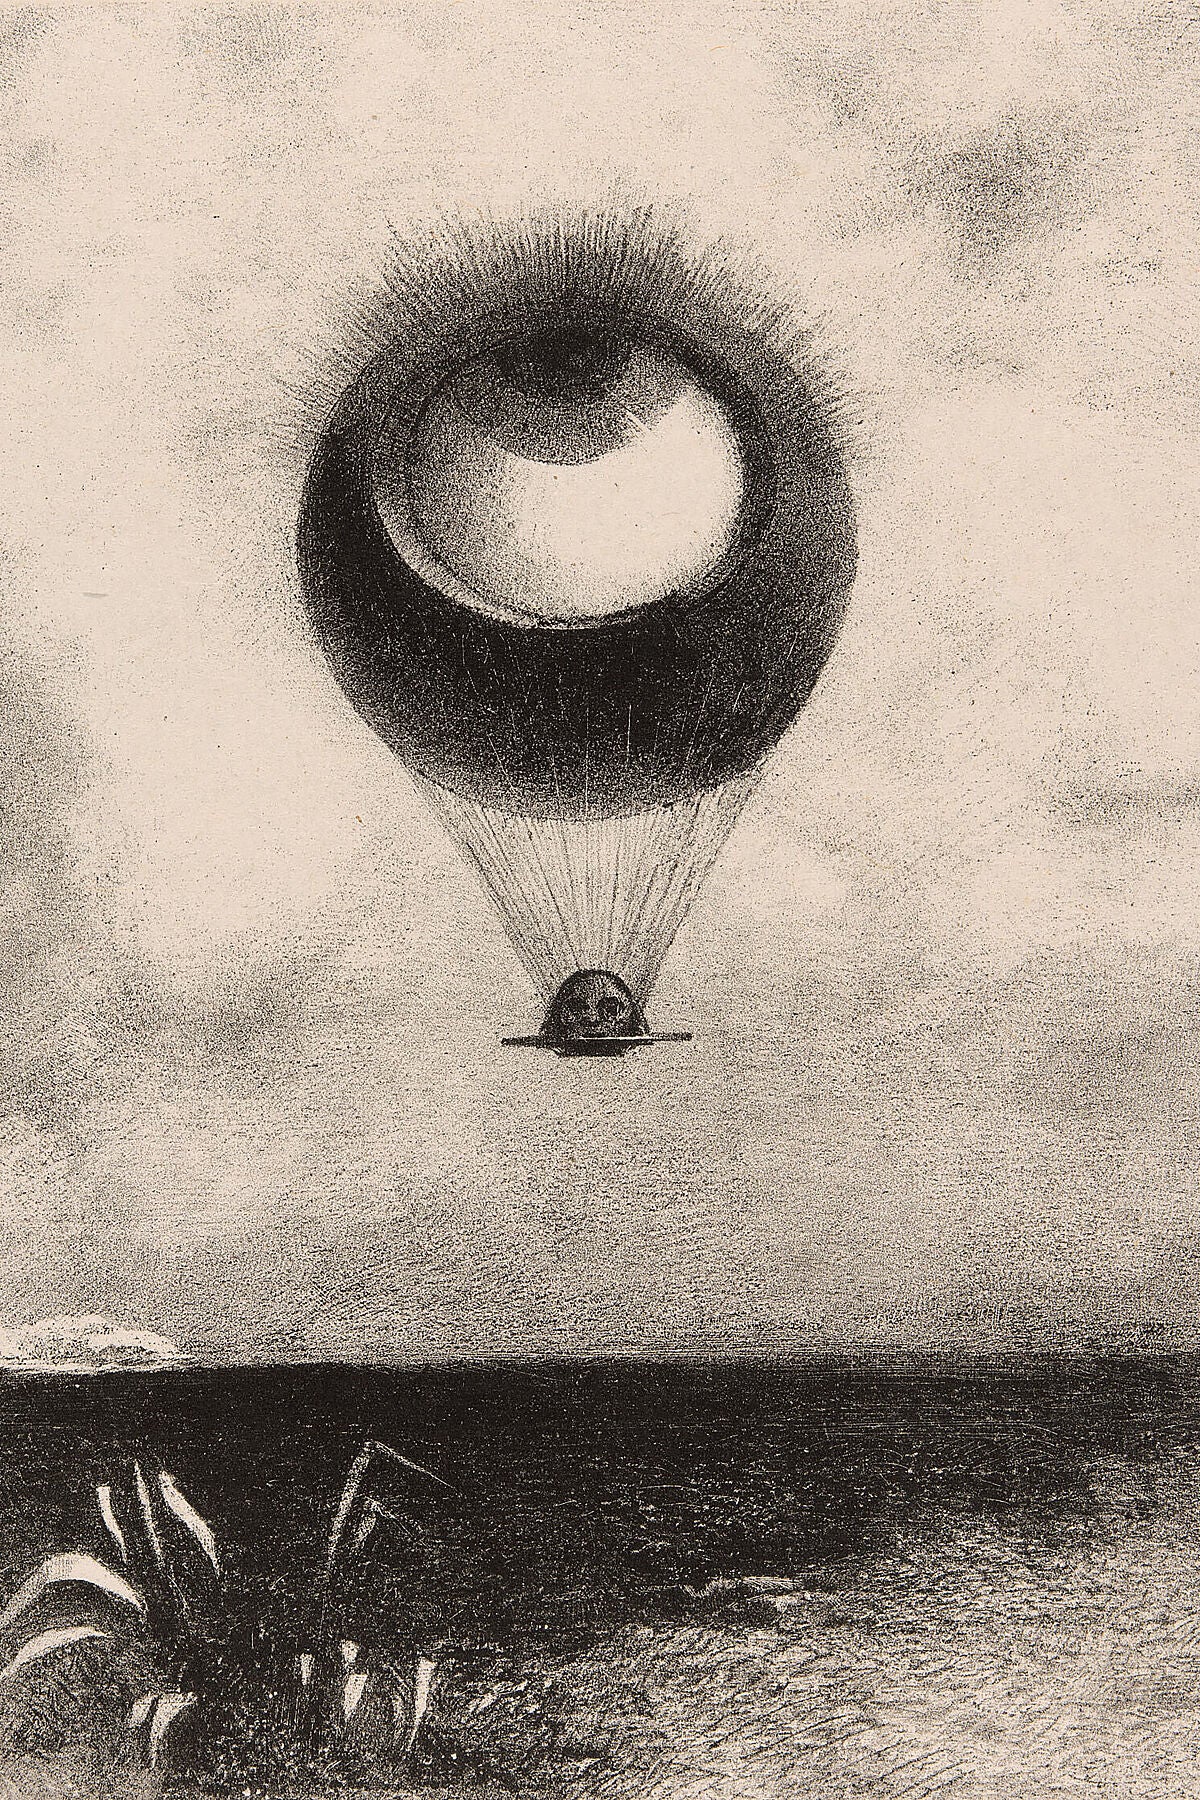 The Eye, Like a Strange Balloon Moves Towards Infinity, plate one from To Edgar Poe by Odilon Redon - 1882